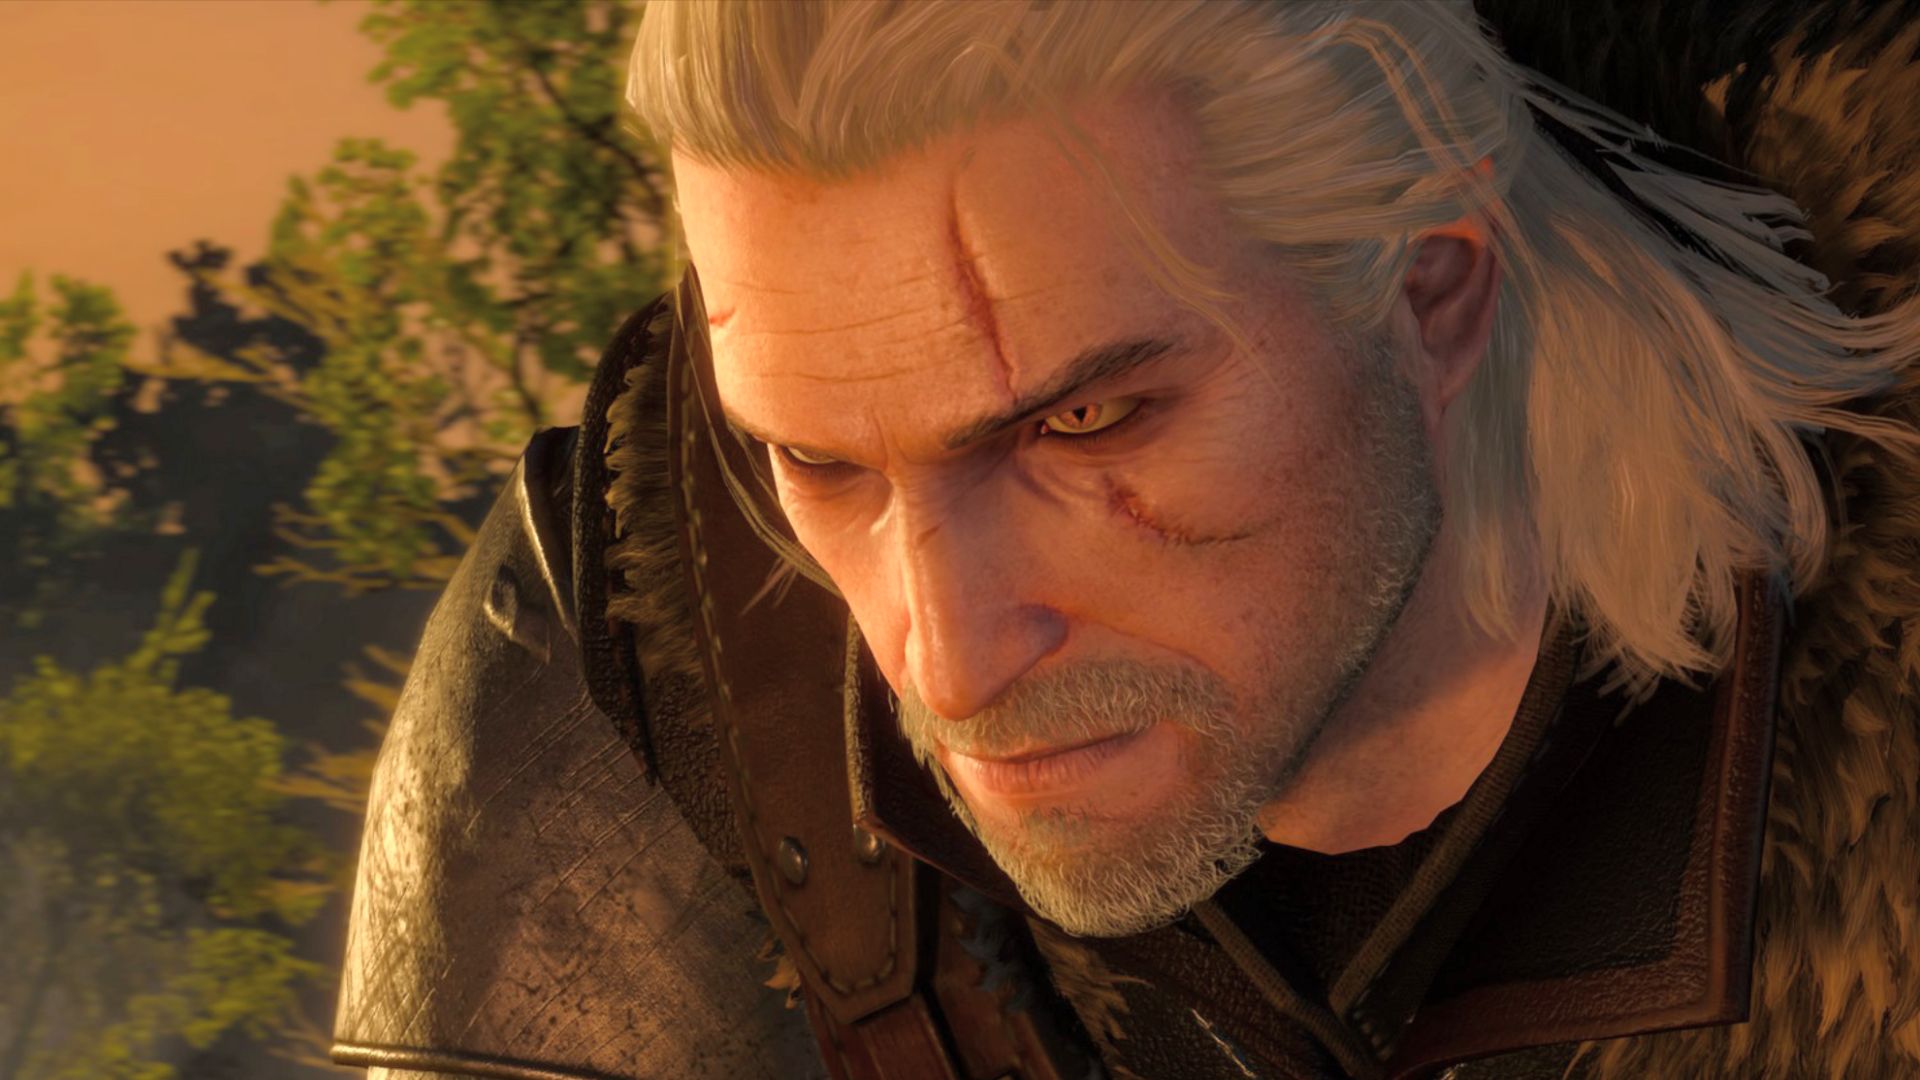 More performance fixes are planned for The Witcher 3 next-gen